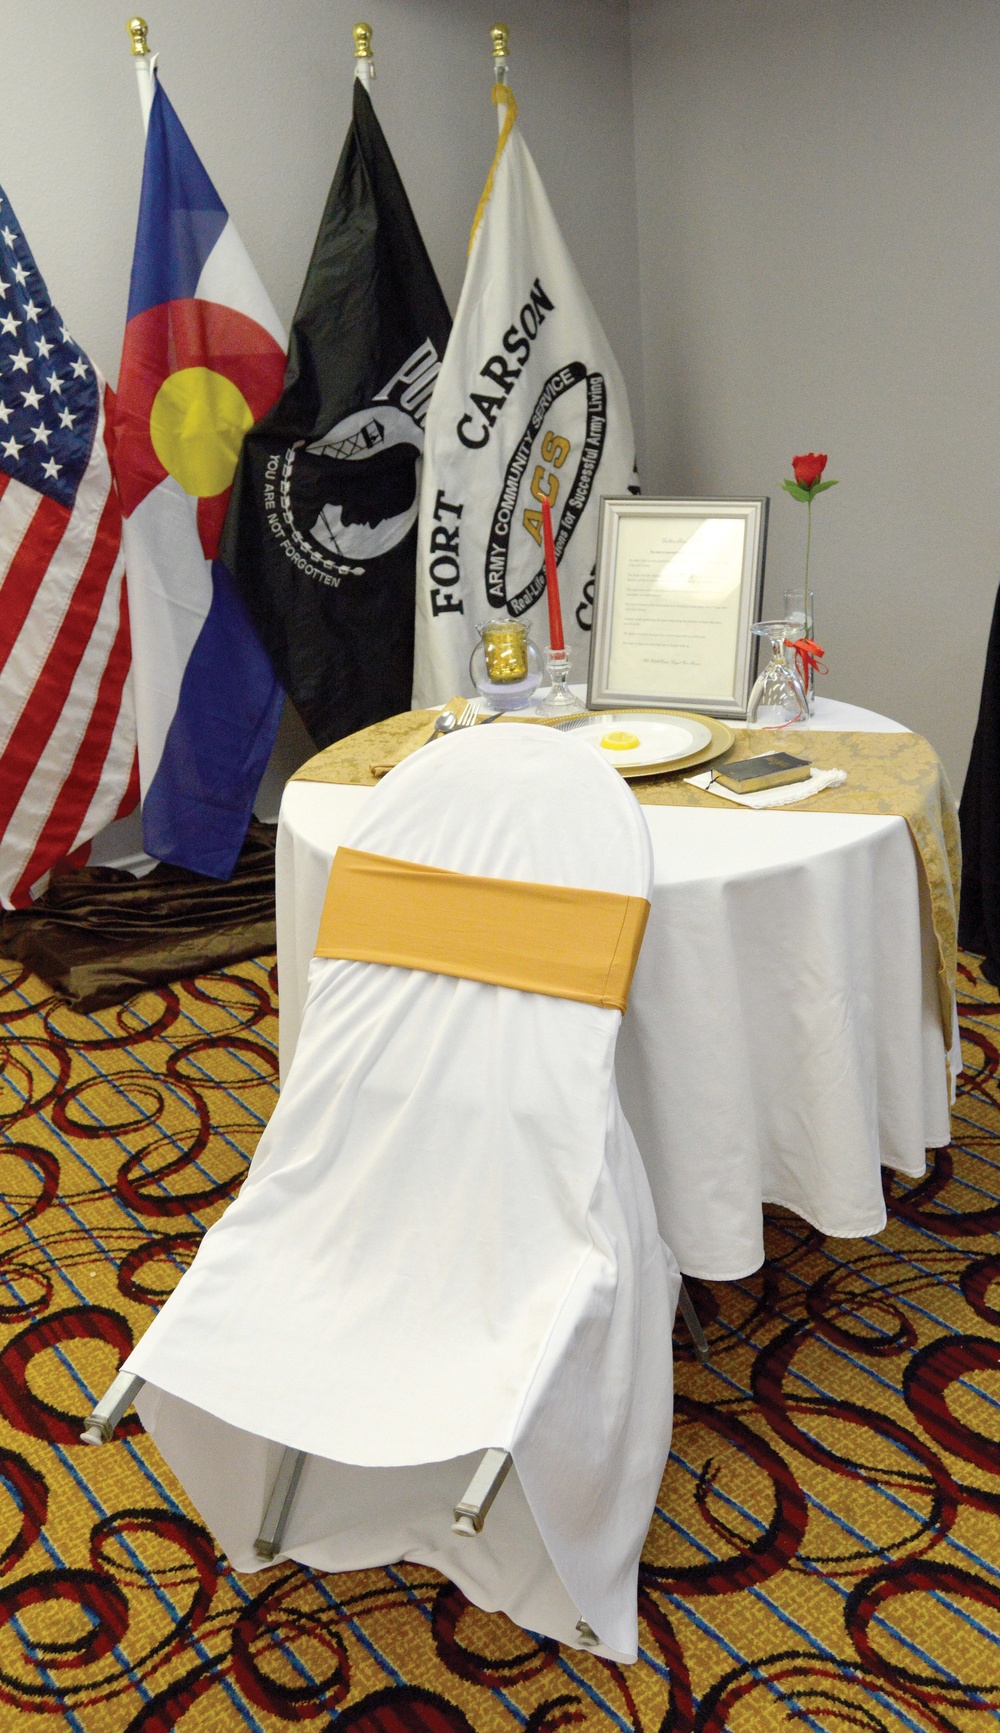 Event honors Gold Star spouses